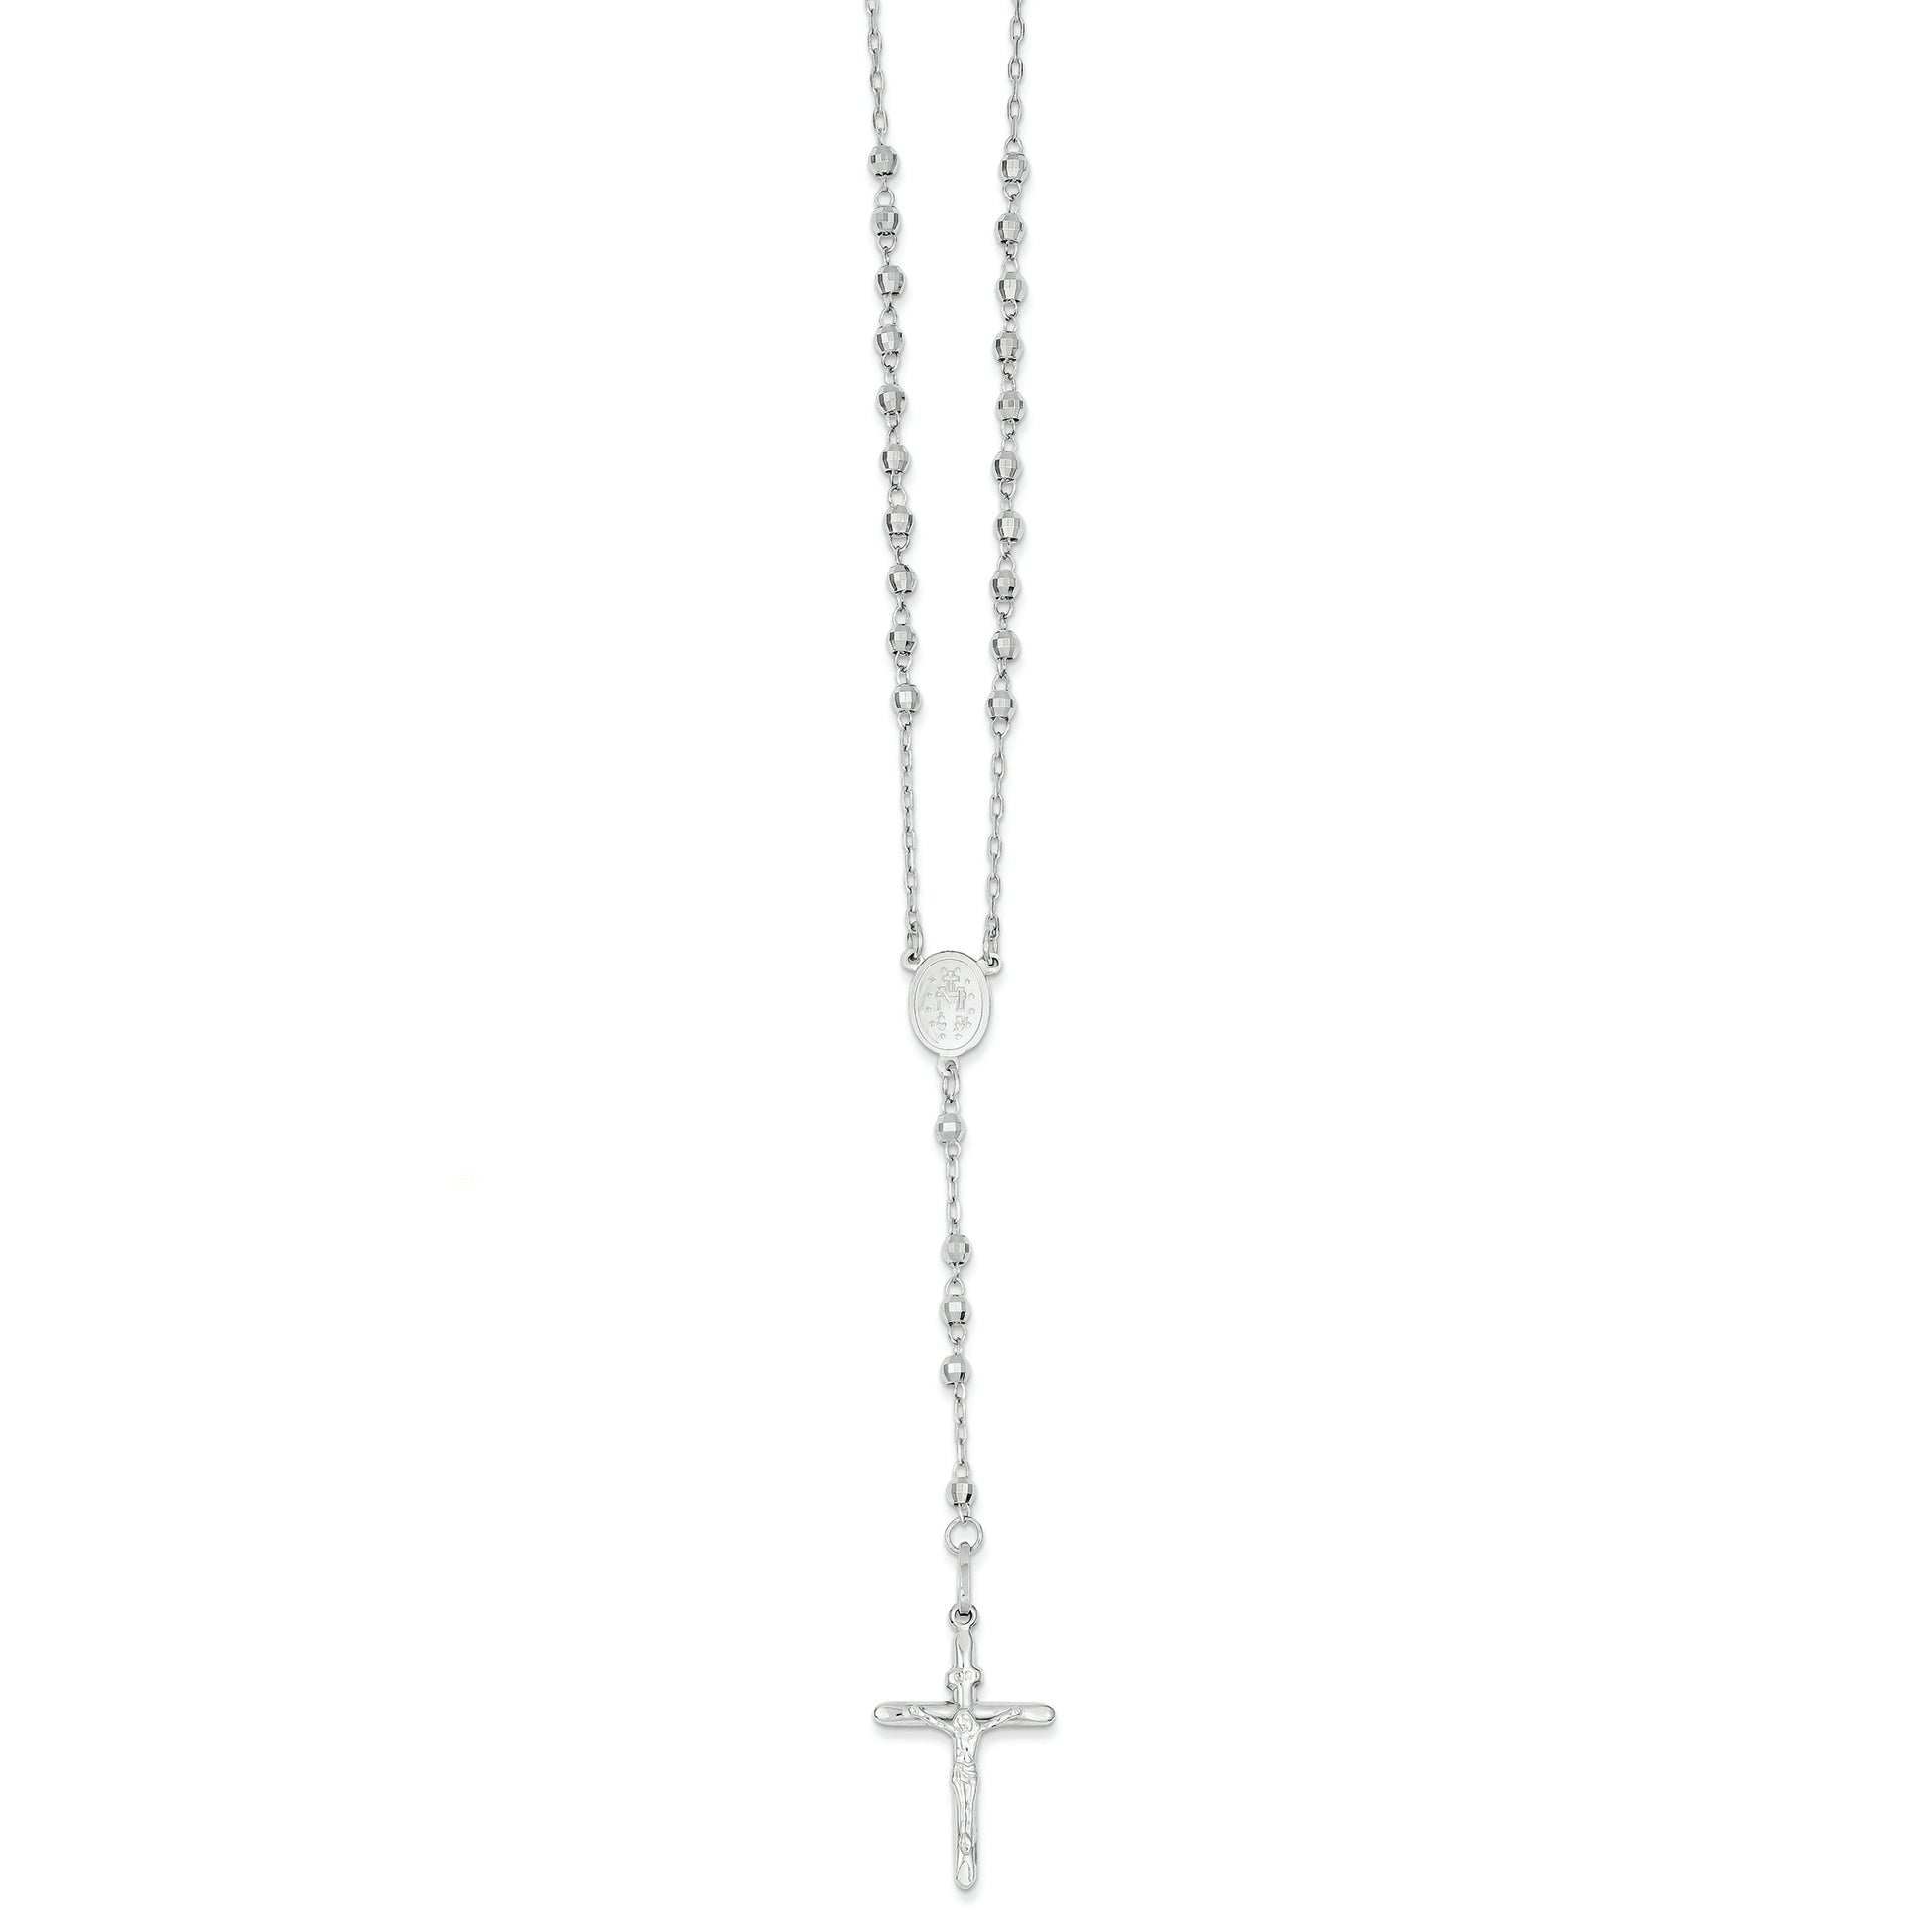 14K White Gold Diamond-cut 3mm Beaded Rosary Necklace 24 Inches